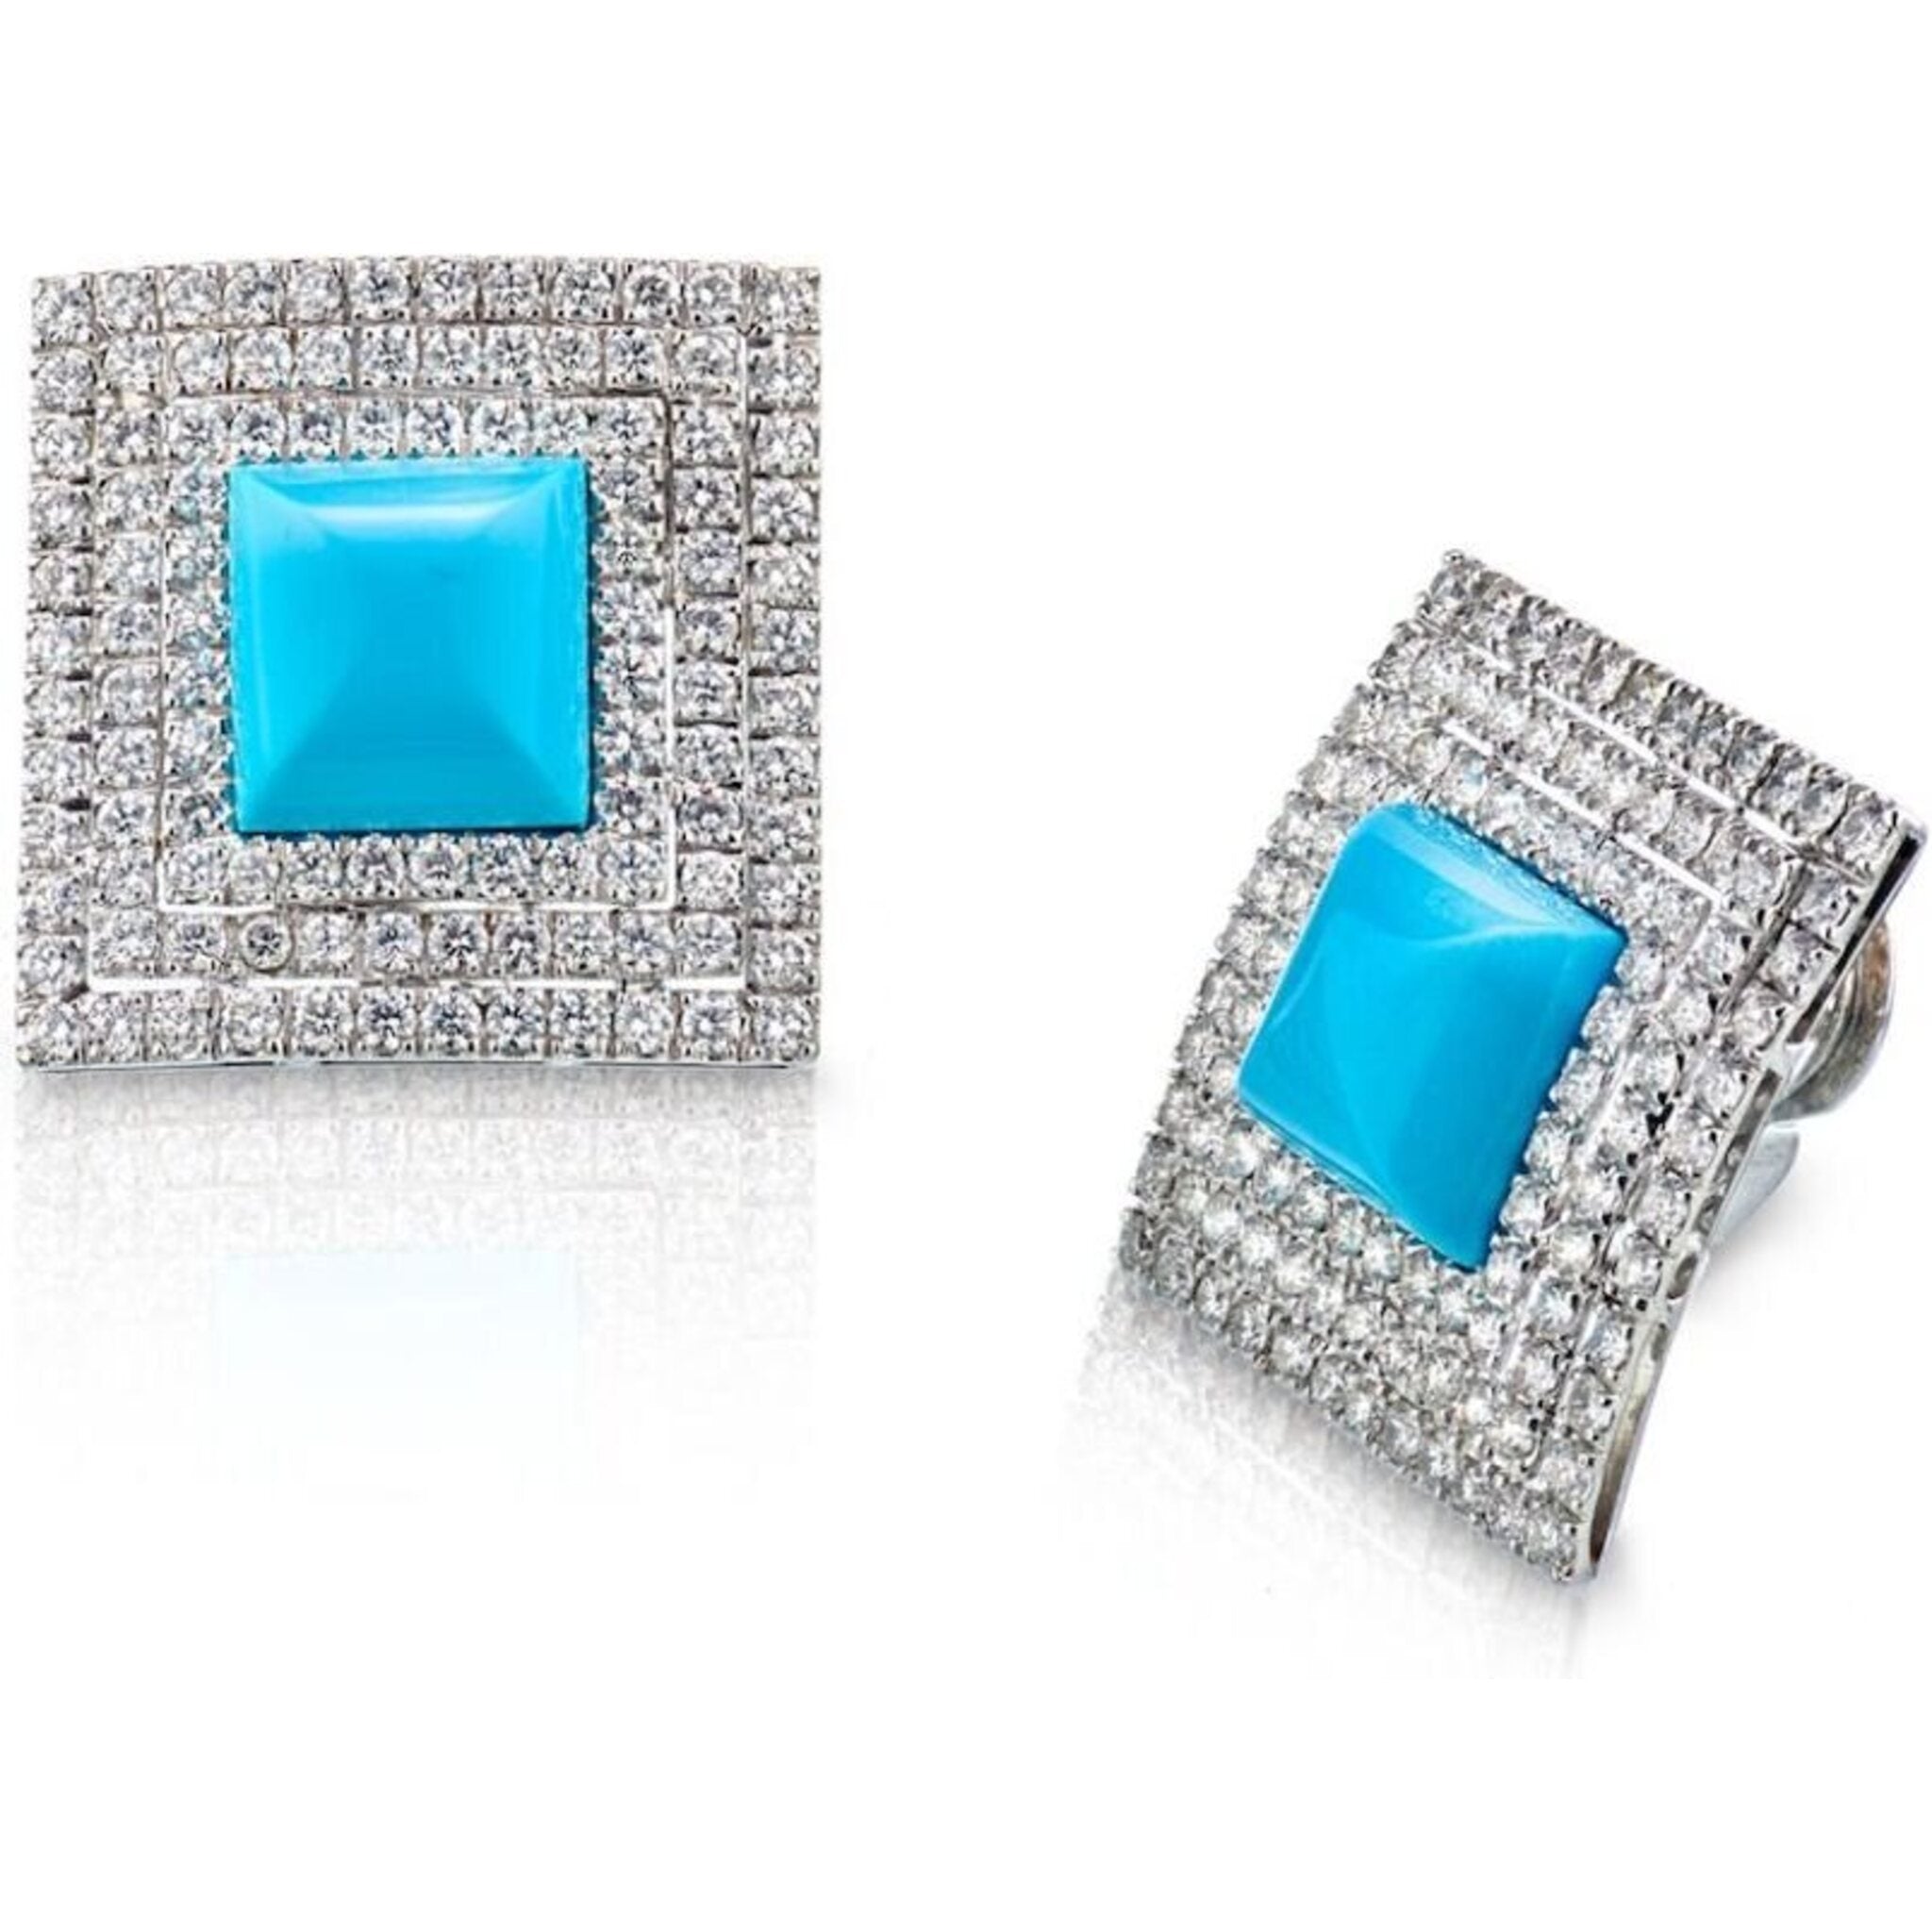 18K White Gold 10.80 Carat Diamond And Turquoise Square Clip-On Earrings